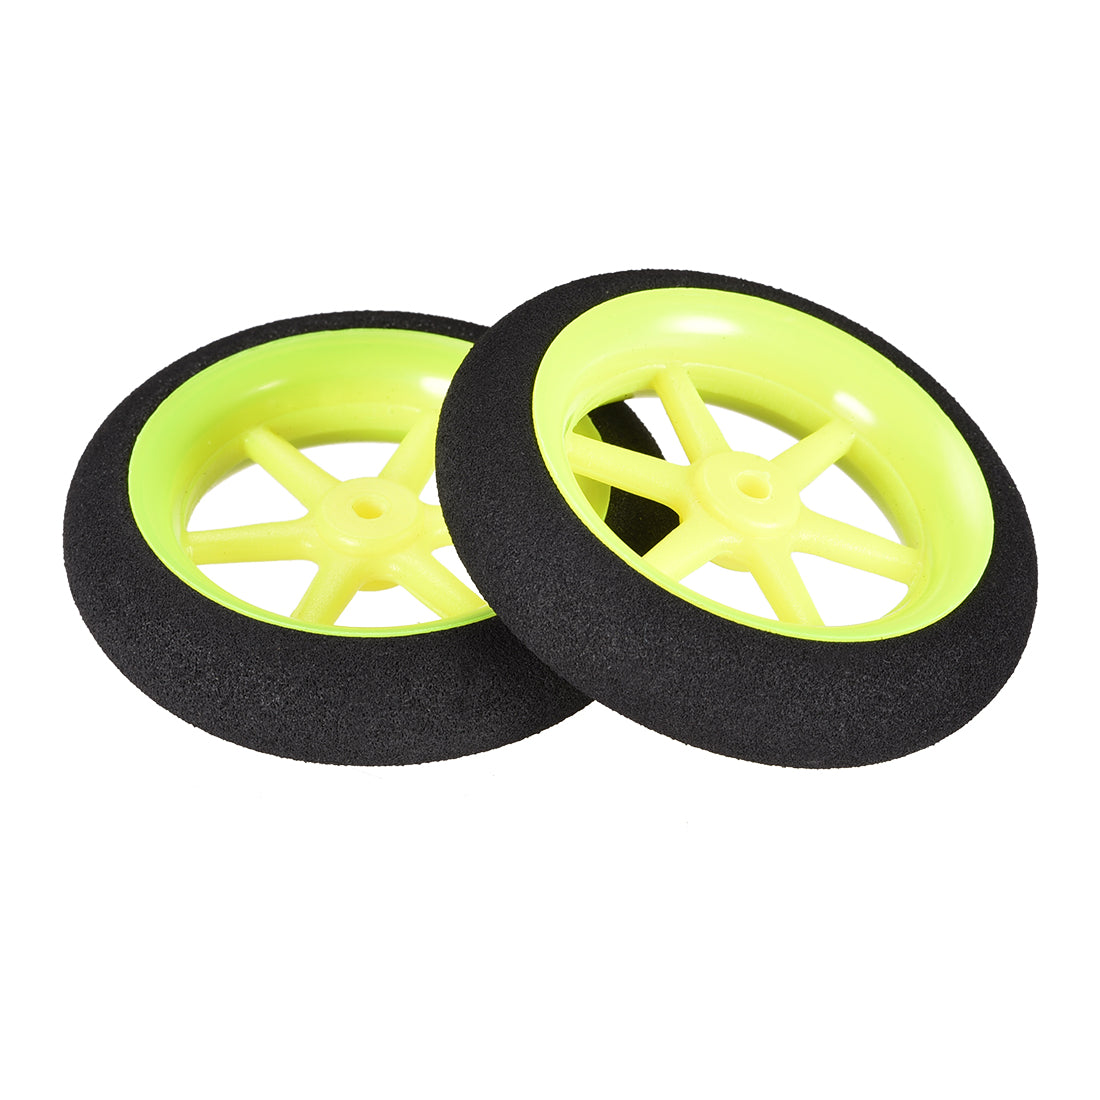 uxcell Uxcell RC Model Plane Aircraft Wheel Micro Sport Wheel 0.11 inch x 1.96 inch -   Wheel 2PCS